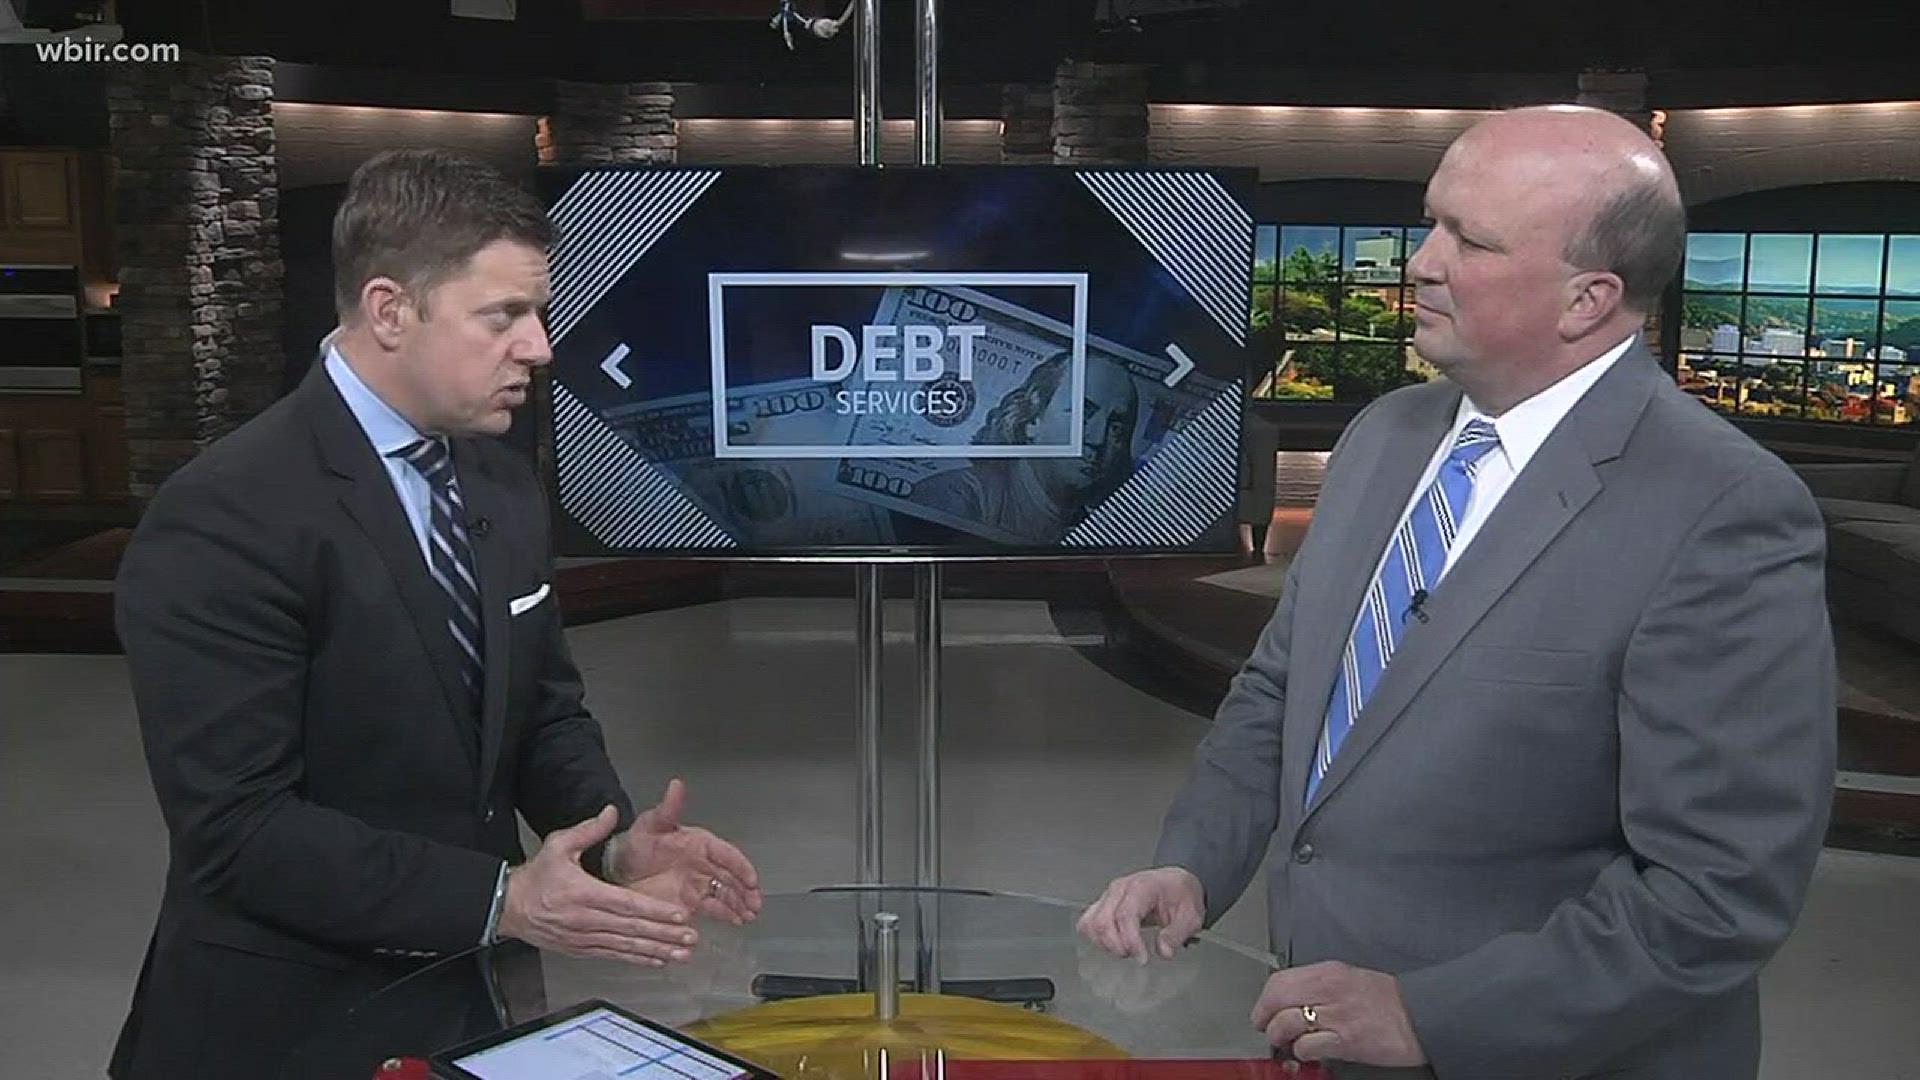 Knox County Mayoral Candidate Brad Anders talks about debt services in Knox County.